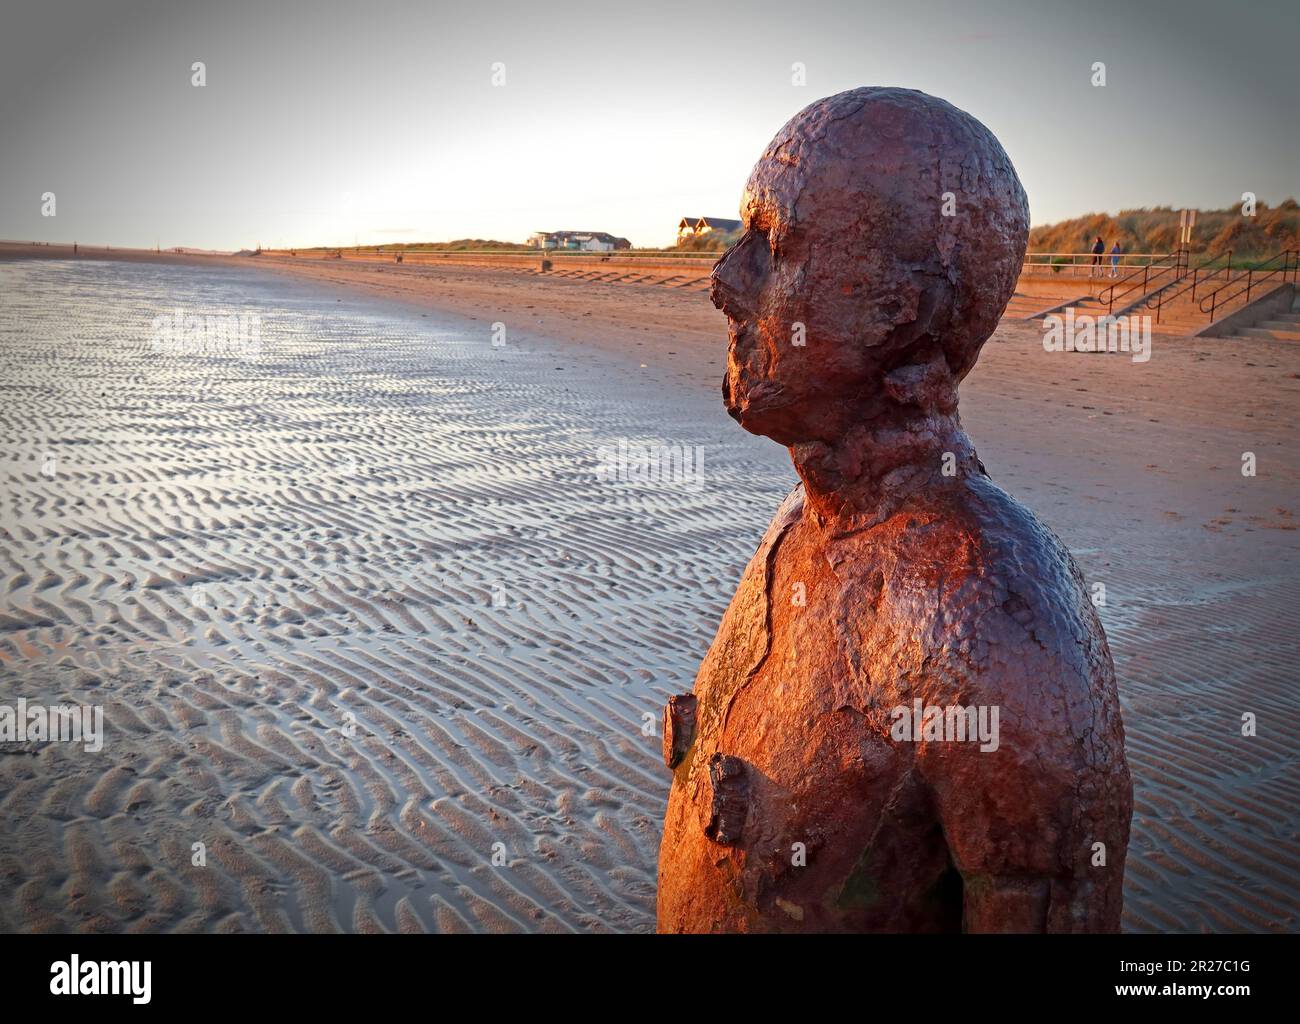 Antony Gormley, Another Place artwork sculpture, cast iron figures, located between Waterloo and Blundellsands, Merseyside, UK, Stock Photo